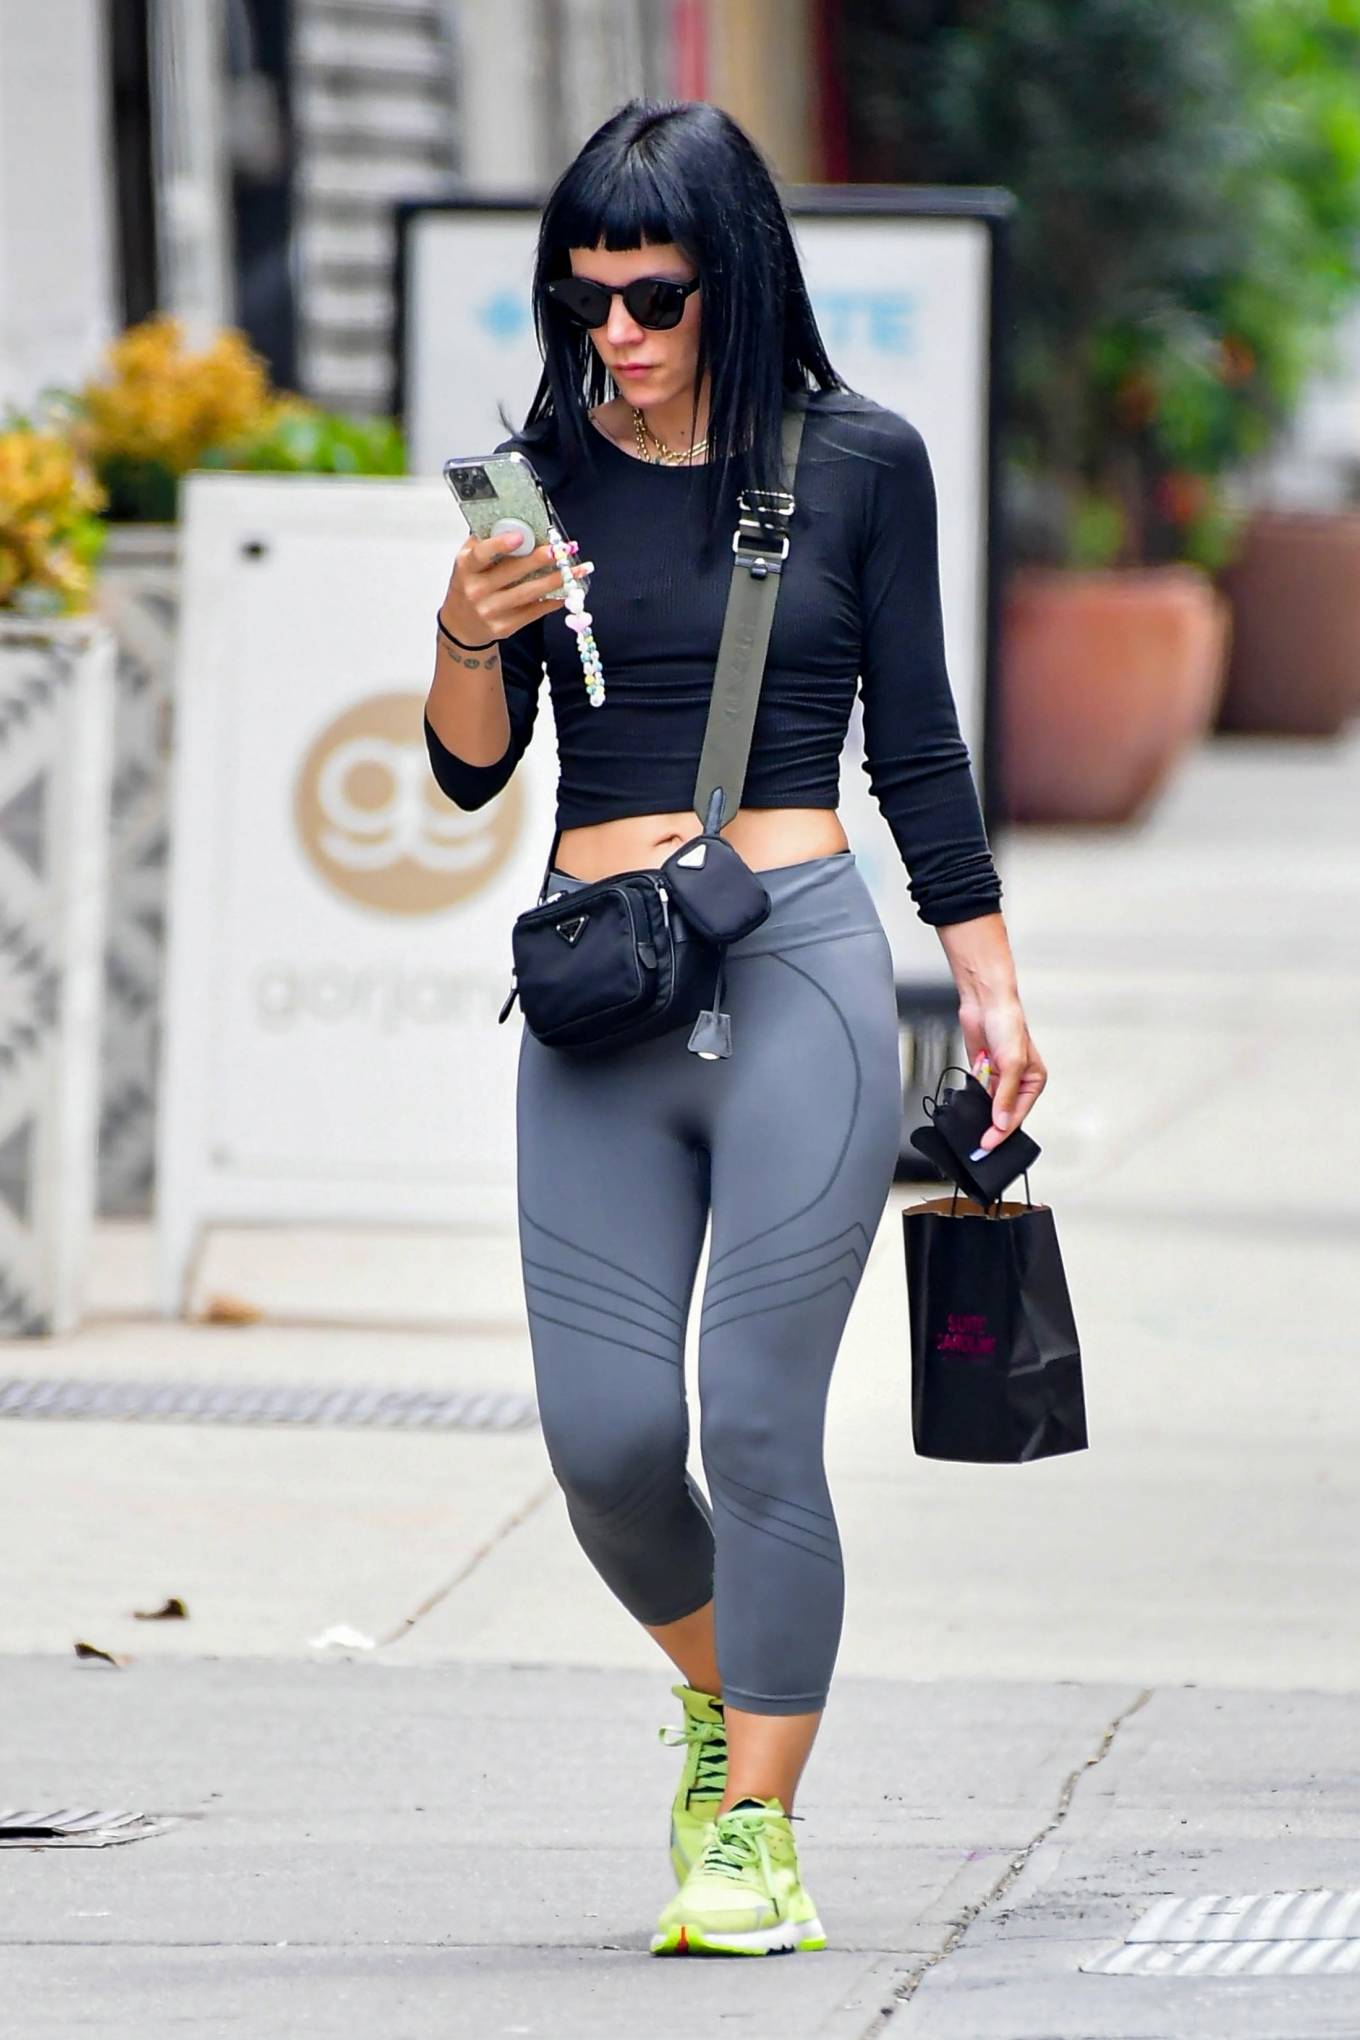 Lily Allen 2021 : Lily Allen – Checks on her phone while out shopping in Manhattan-09